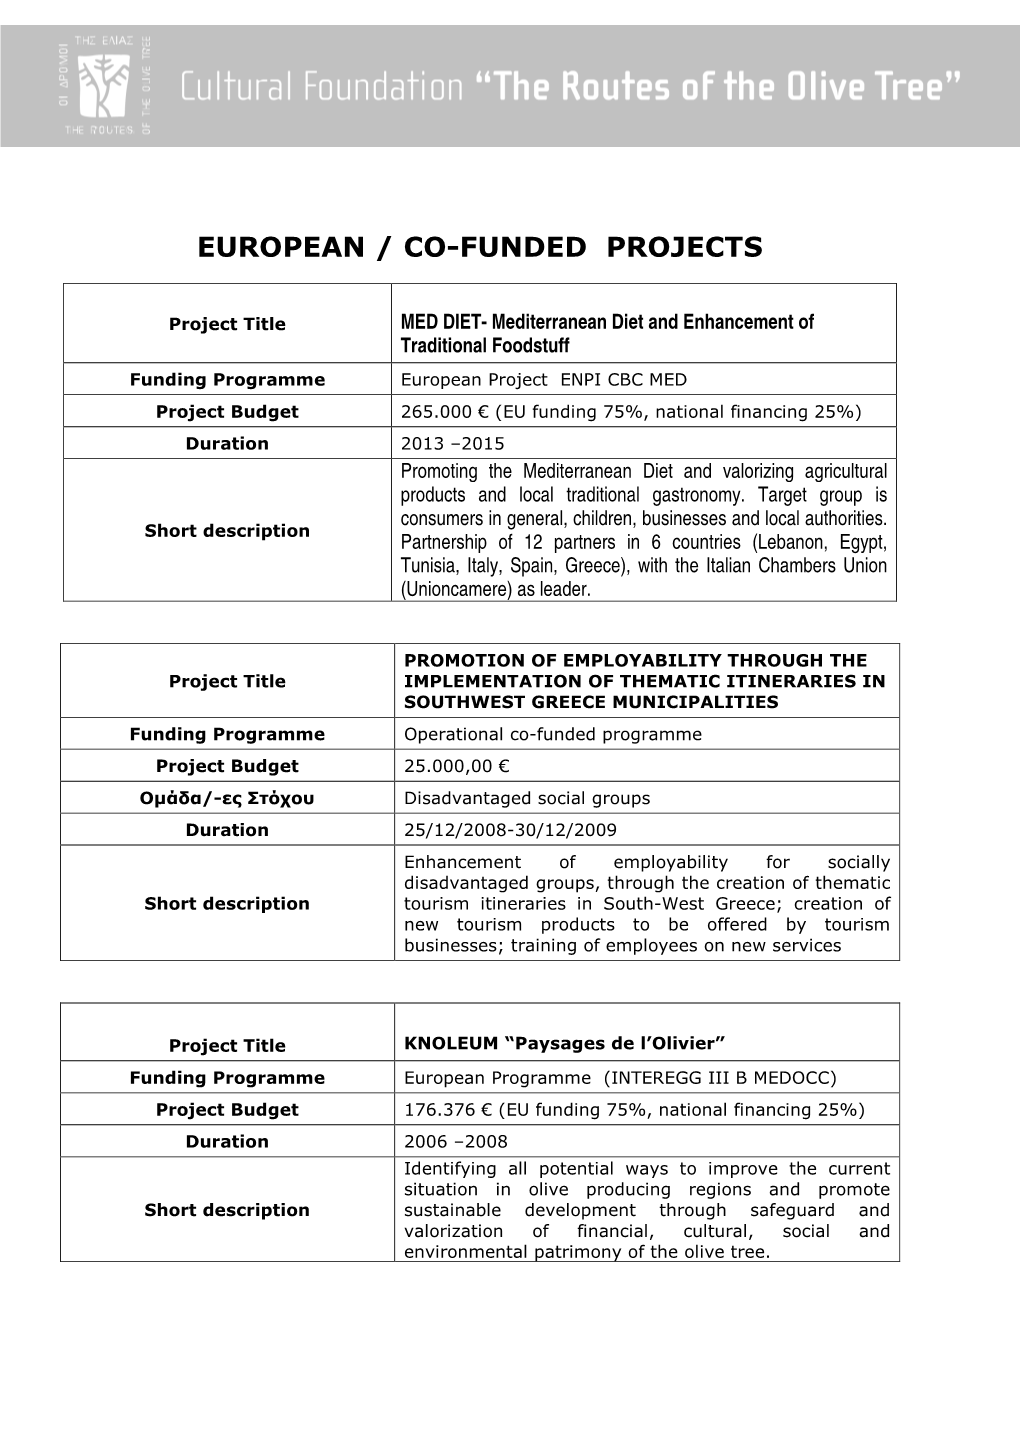 European / Co-Funded Projects